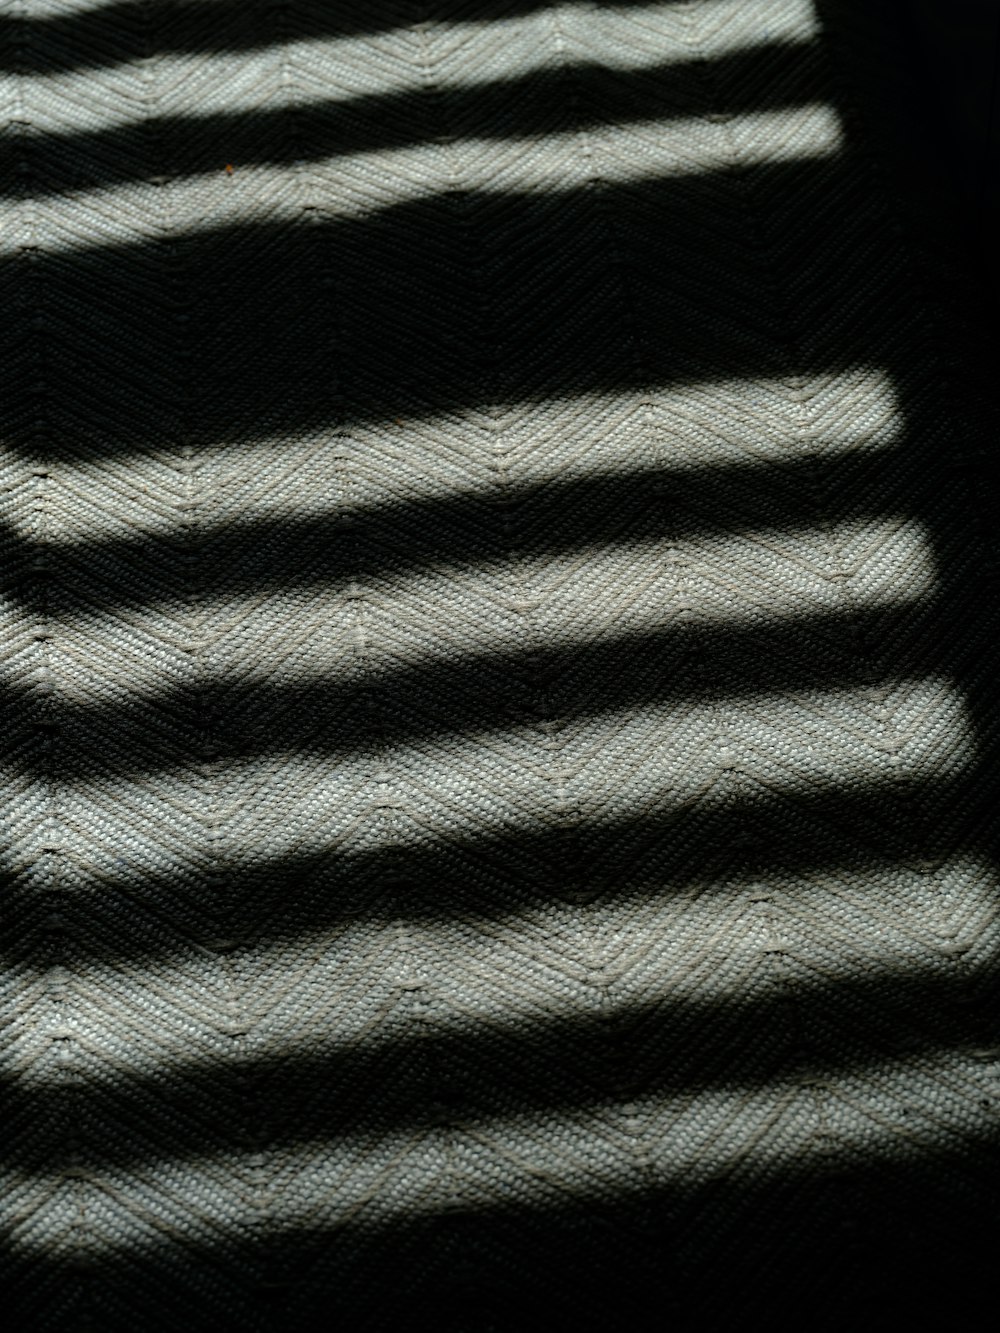 the shadow of a window on a wall